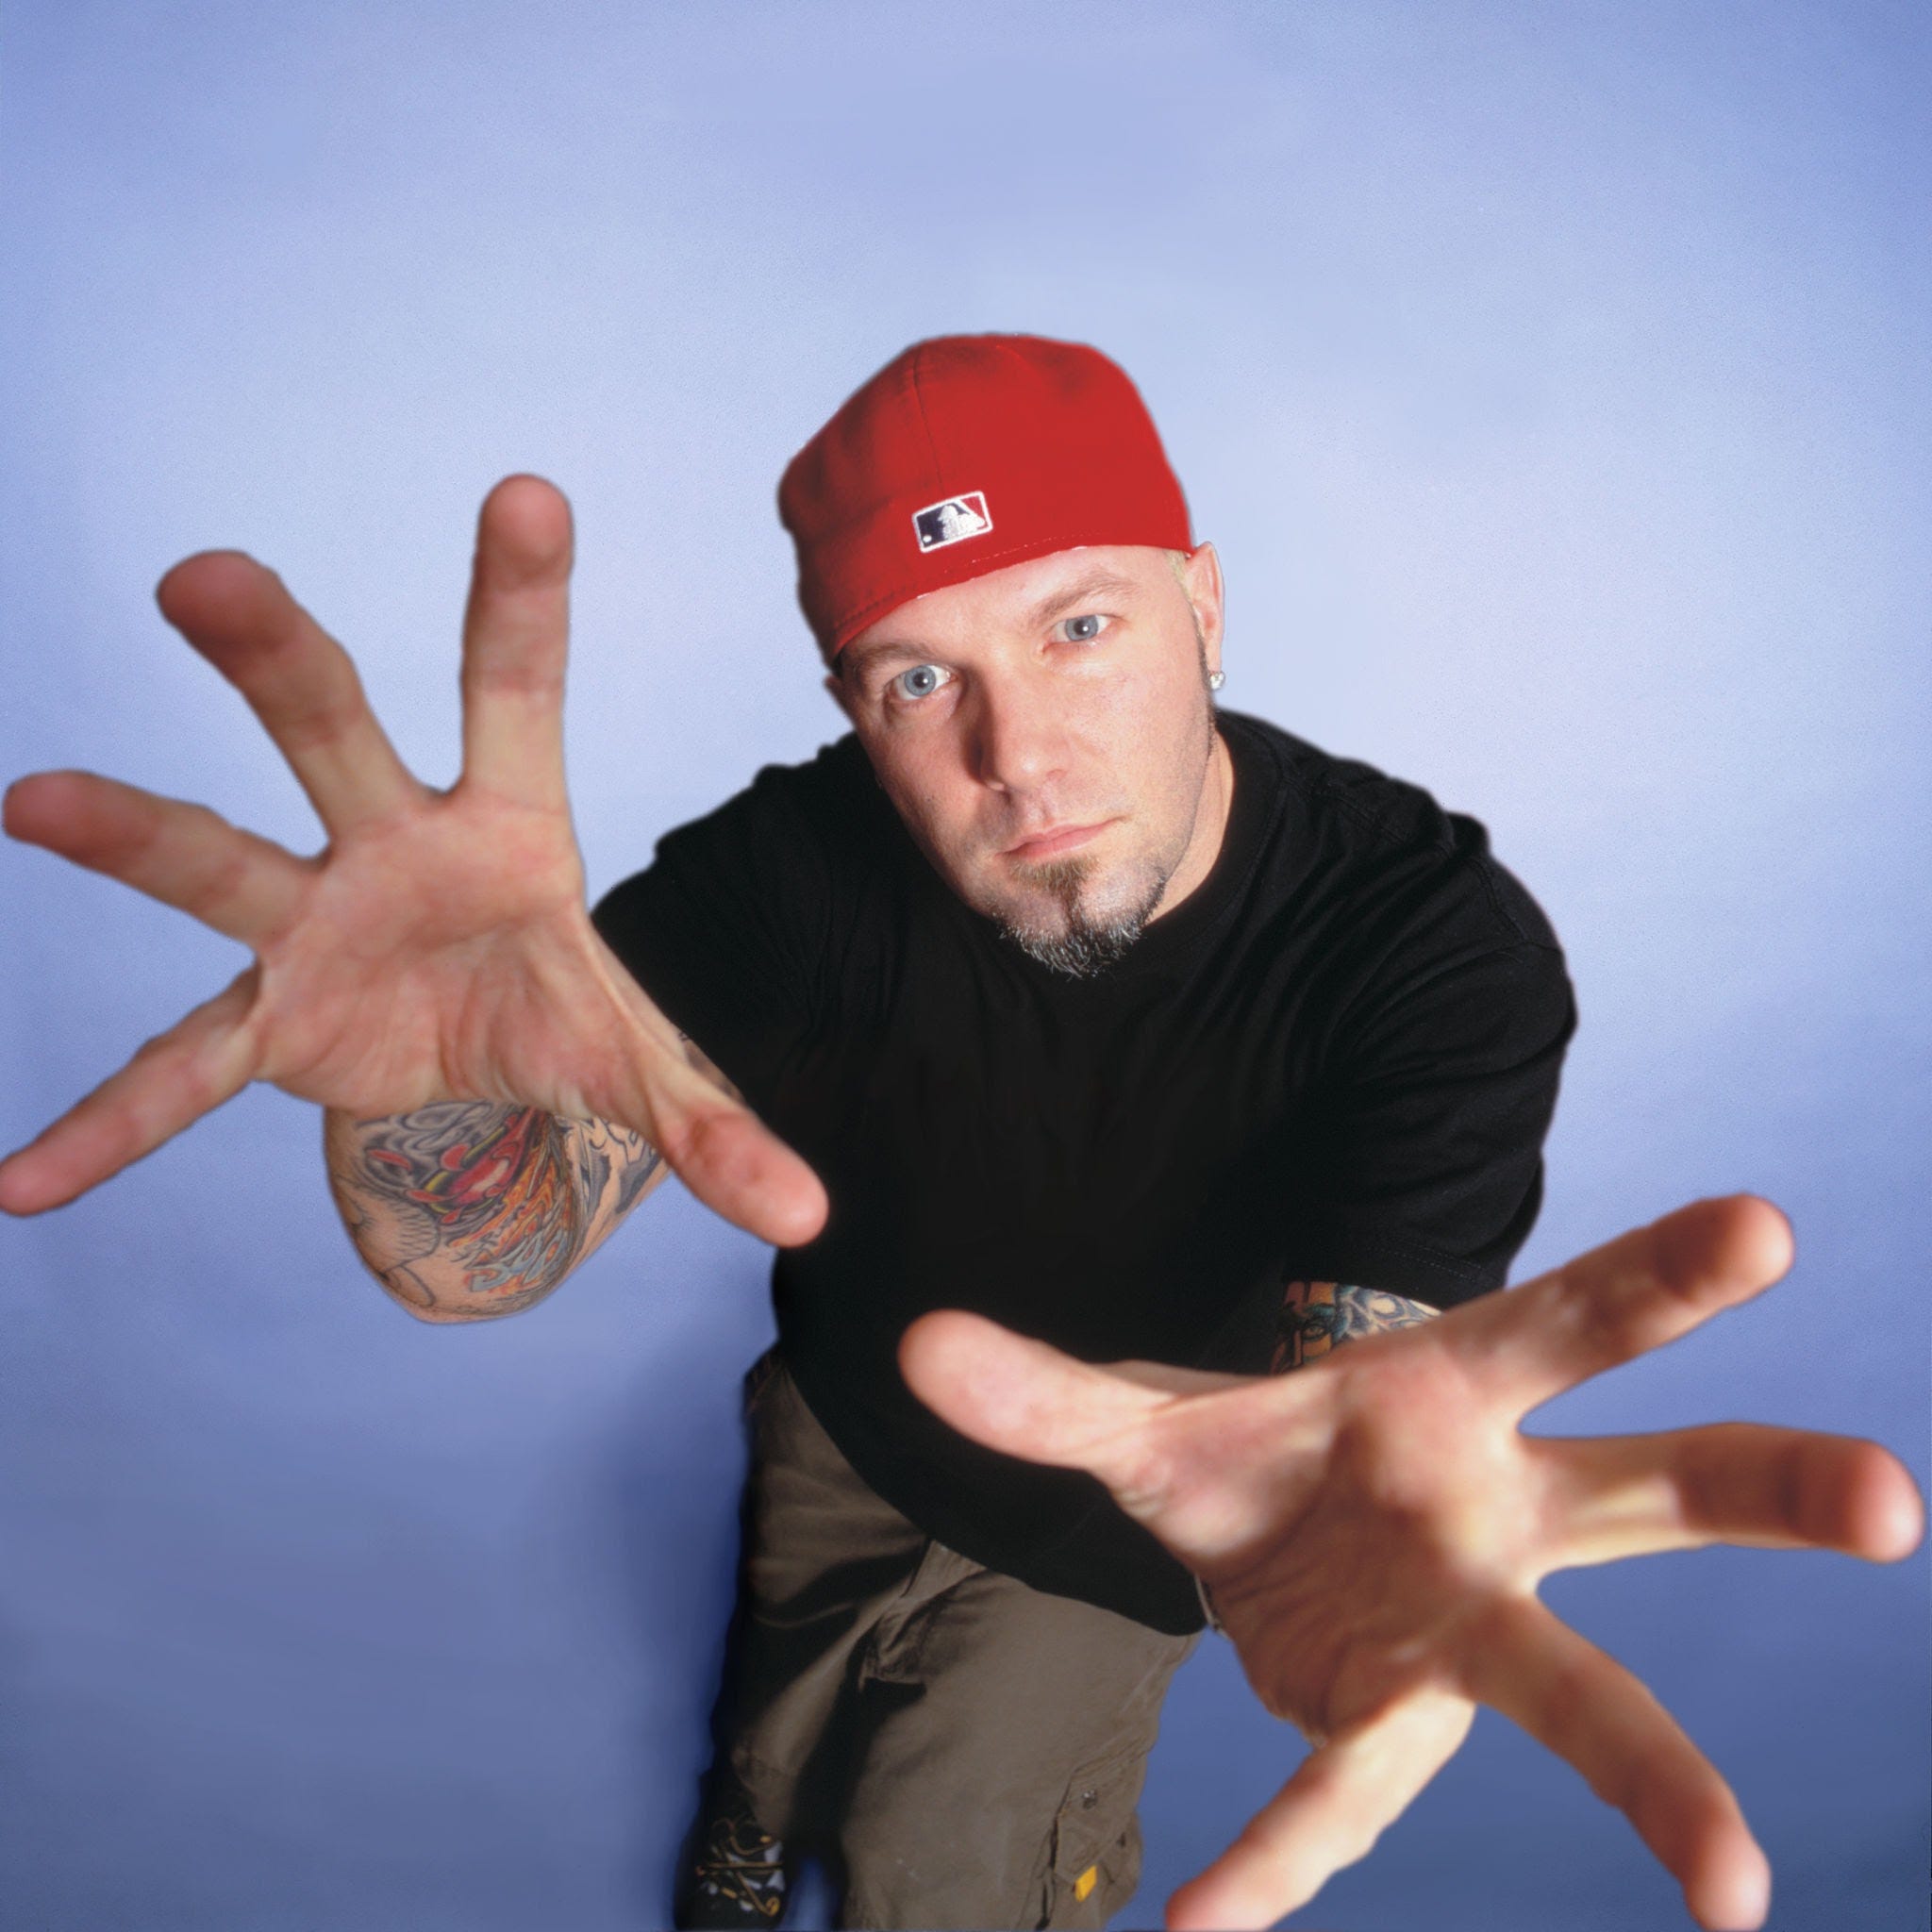 A handsome young man sports a backwards red cap. His name is Fred Durst